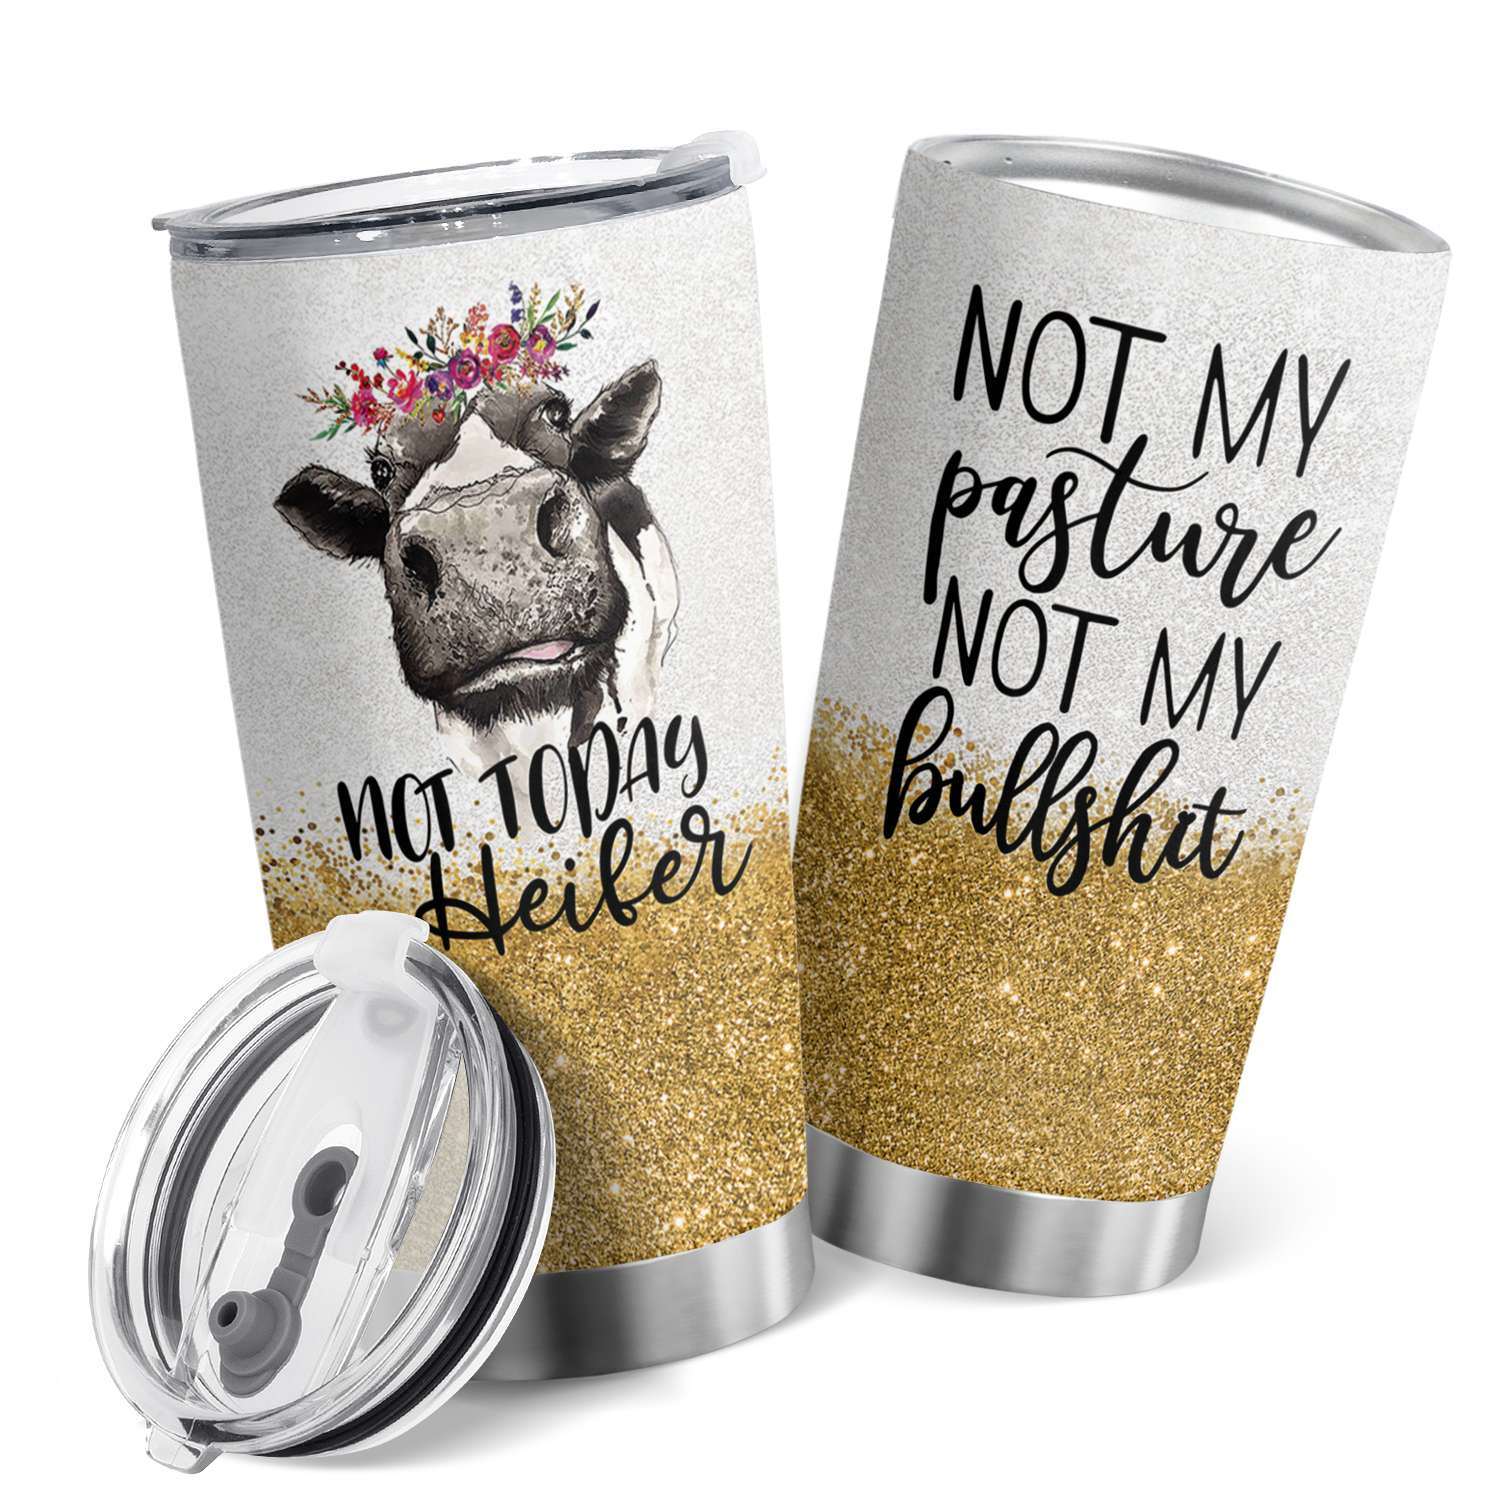 NEW COLORS! Not Today Heifer and Not in the Mooood 18oz Frosted Beer C –  Thistle & Stitch